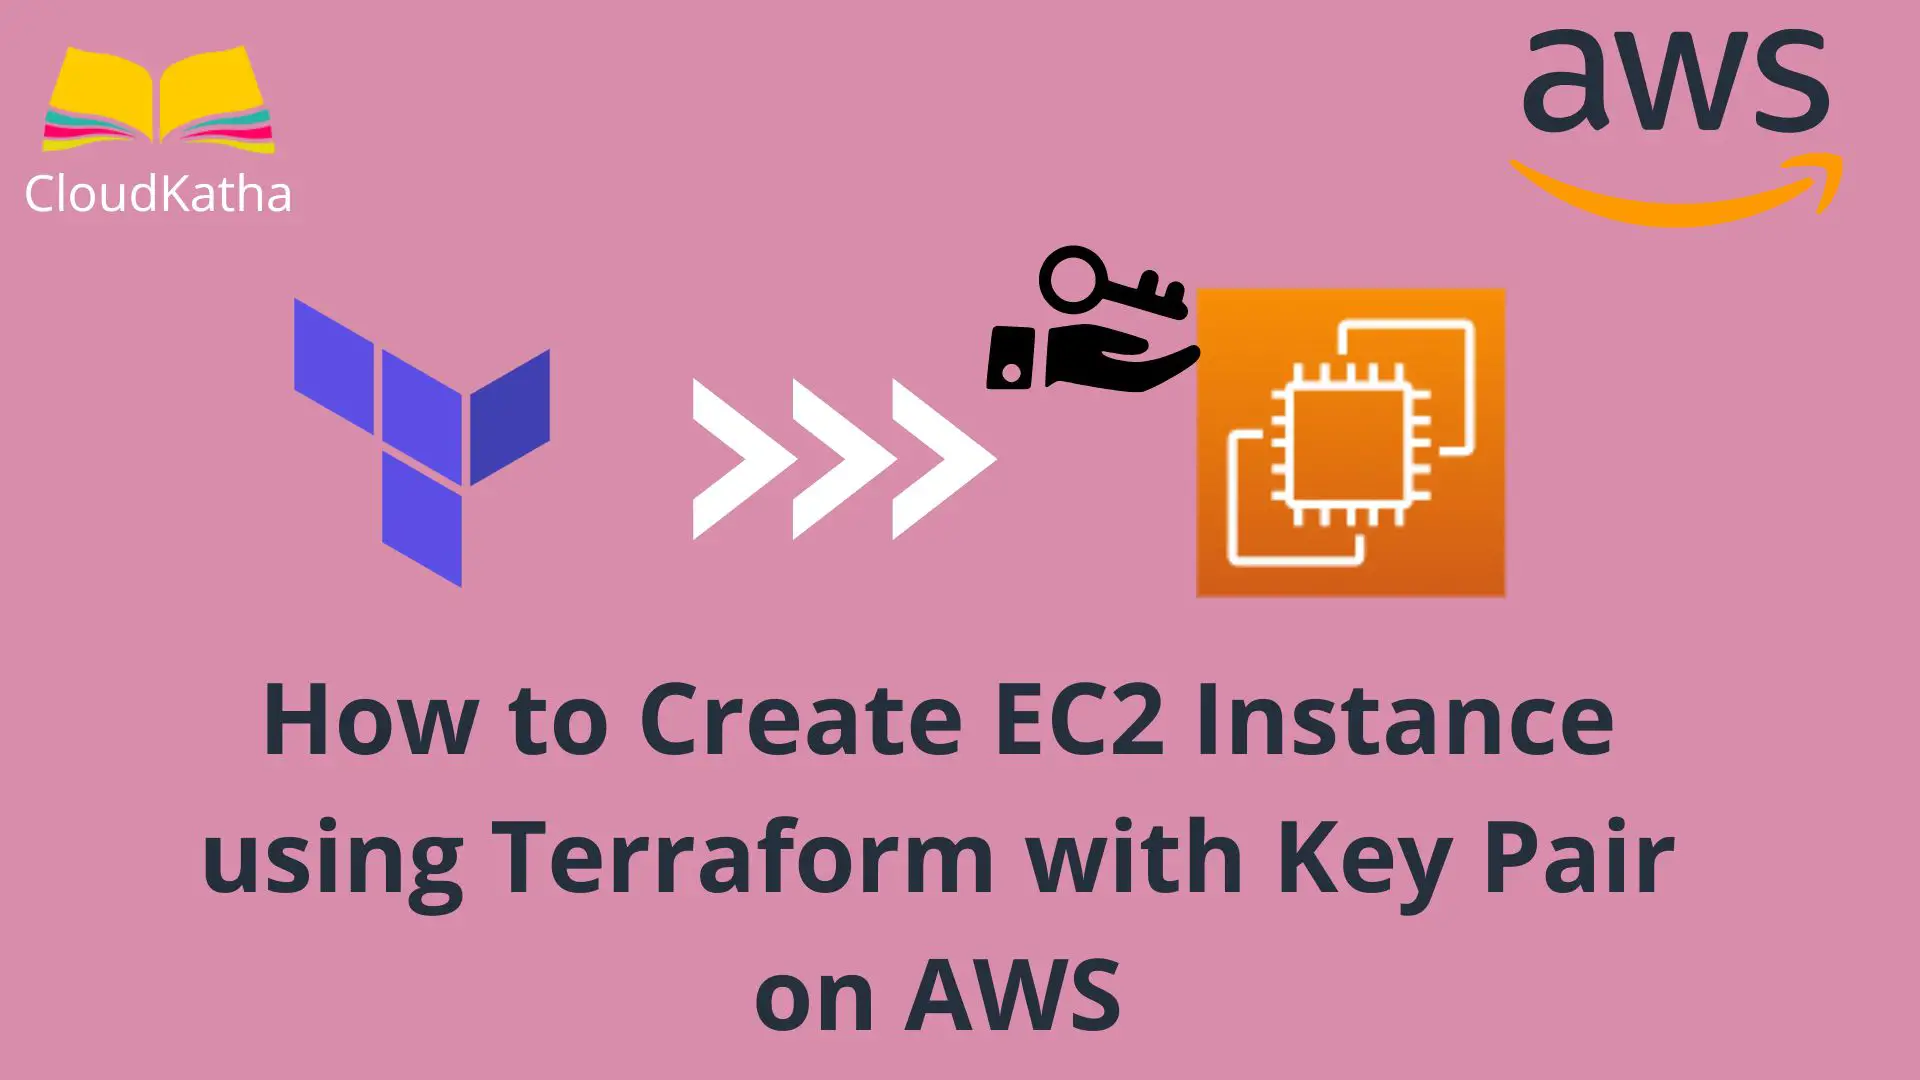 How to Create EC2 Instance using Terraform with Key Pair on AWS